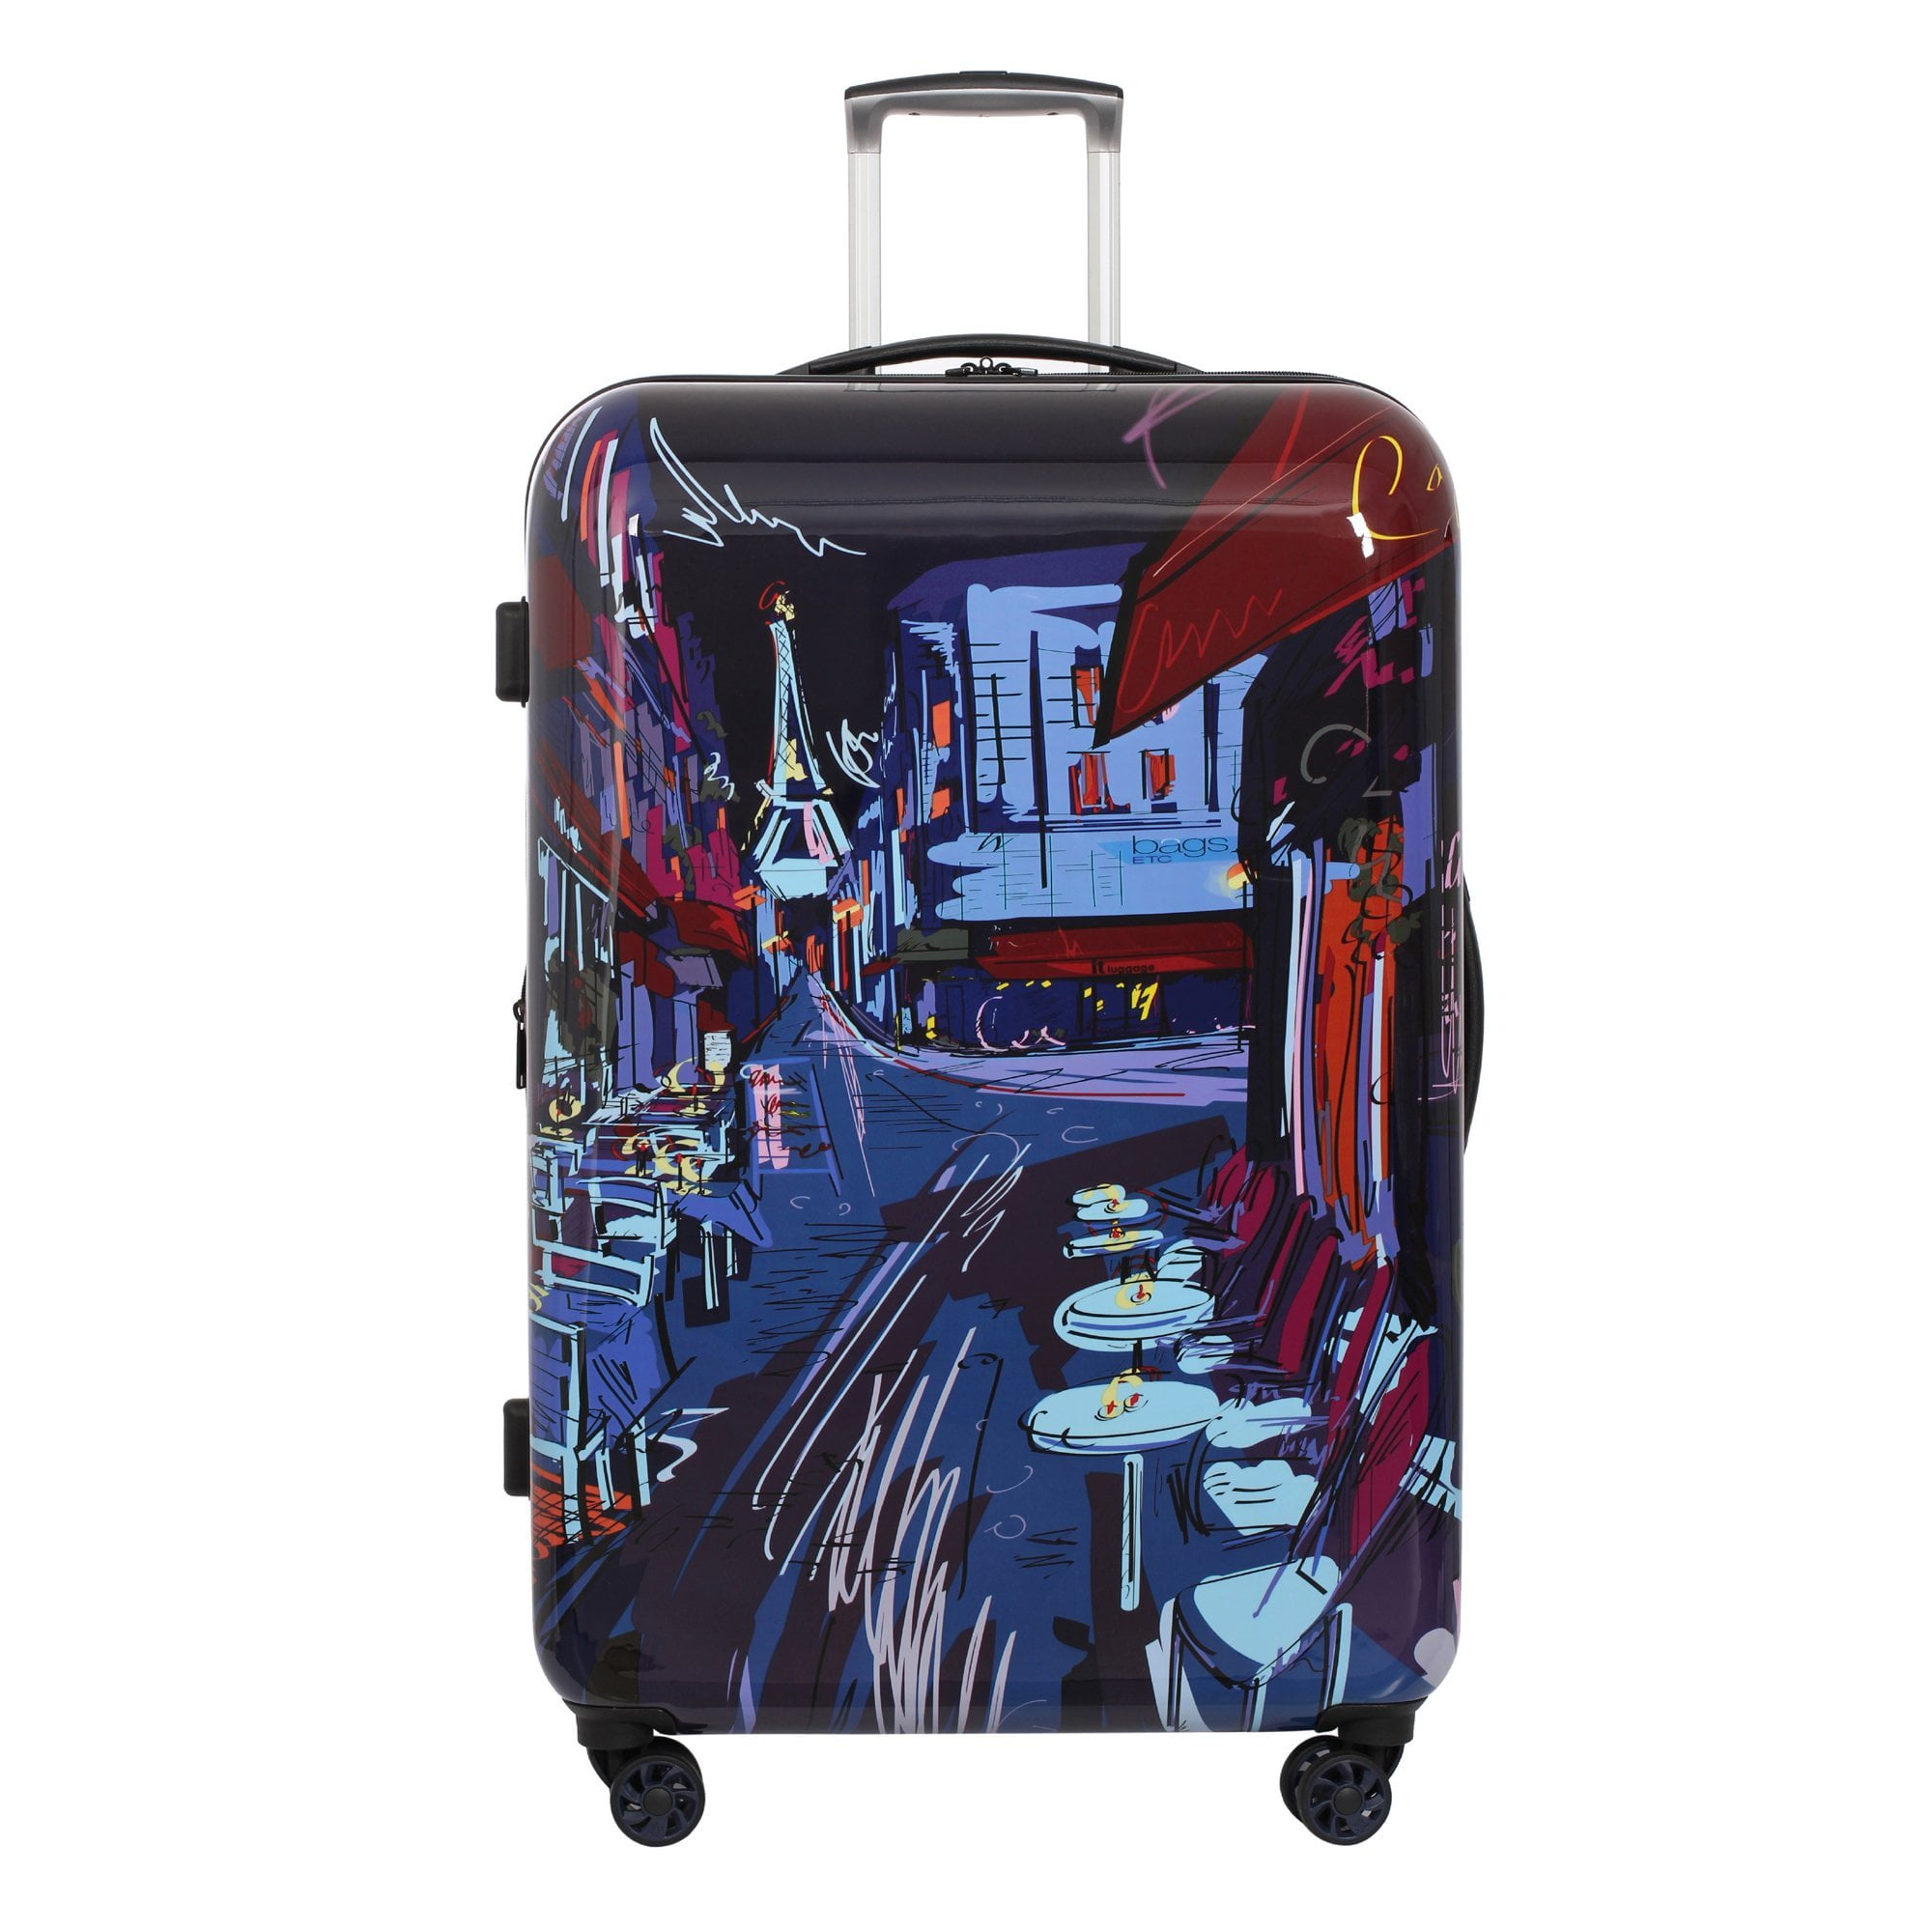 Ikase Hardside Spinner Luggage Notre dame Paris by Piddix 